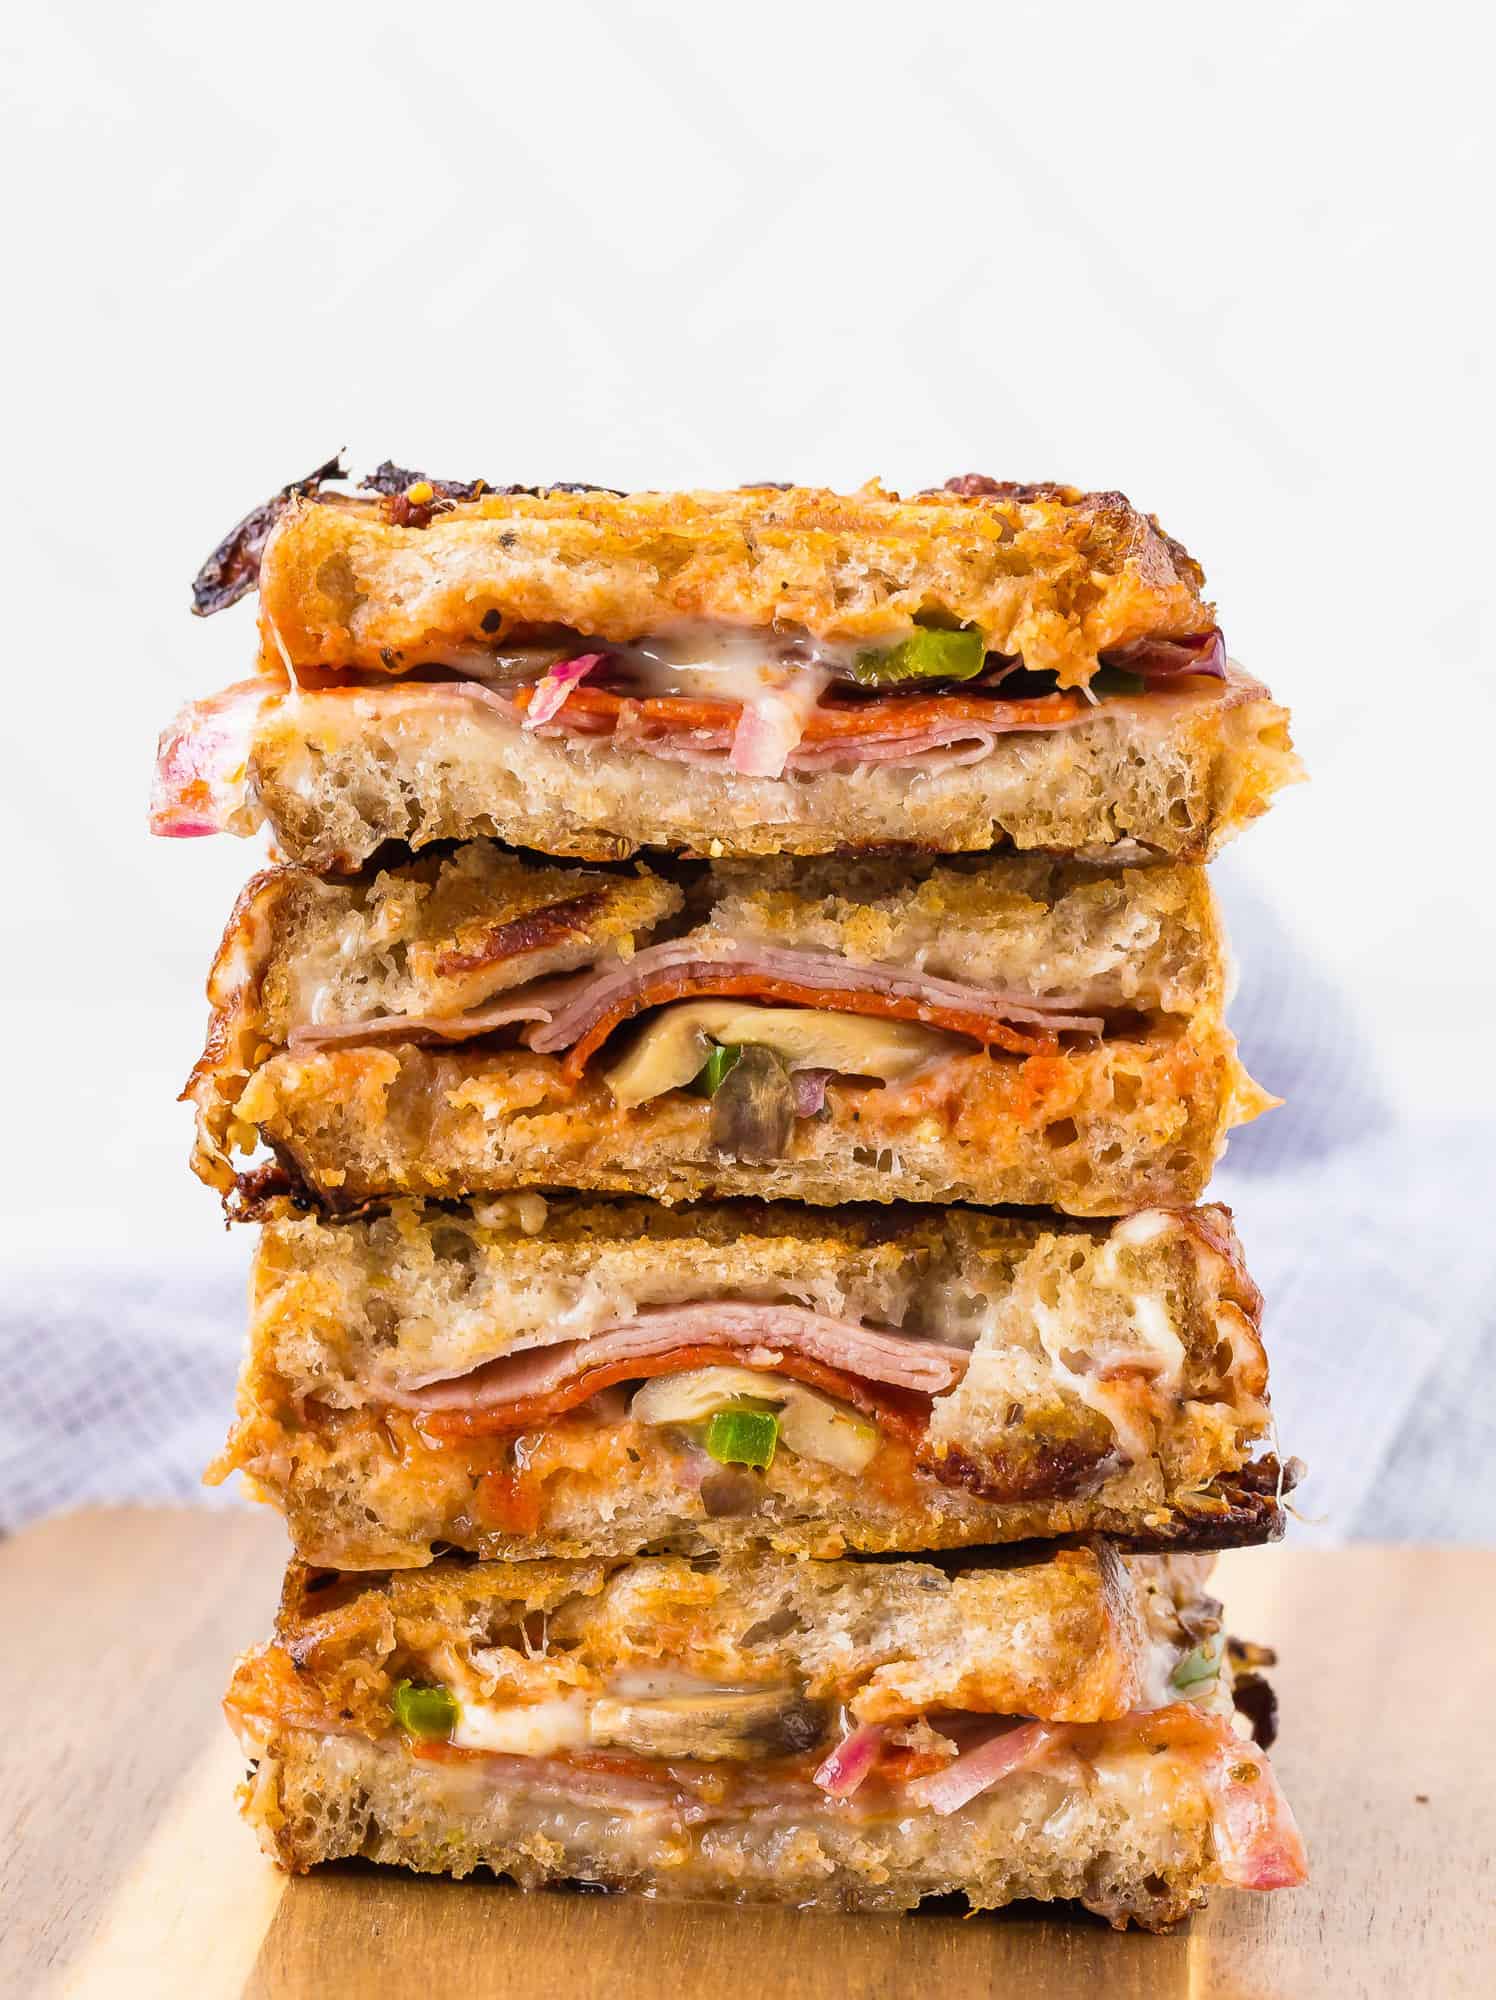 Grilled sandwiches with pizza fillings.